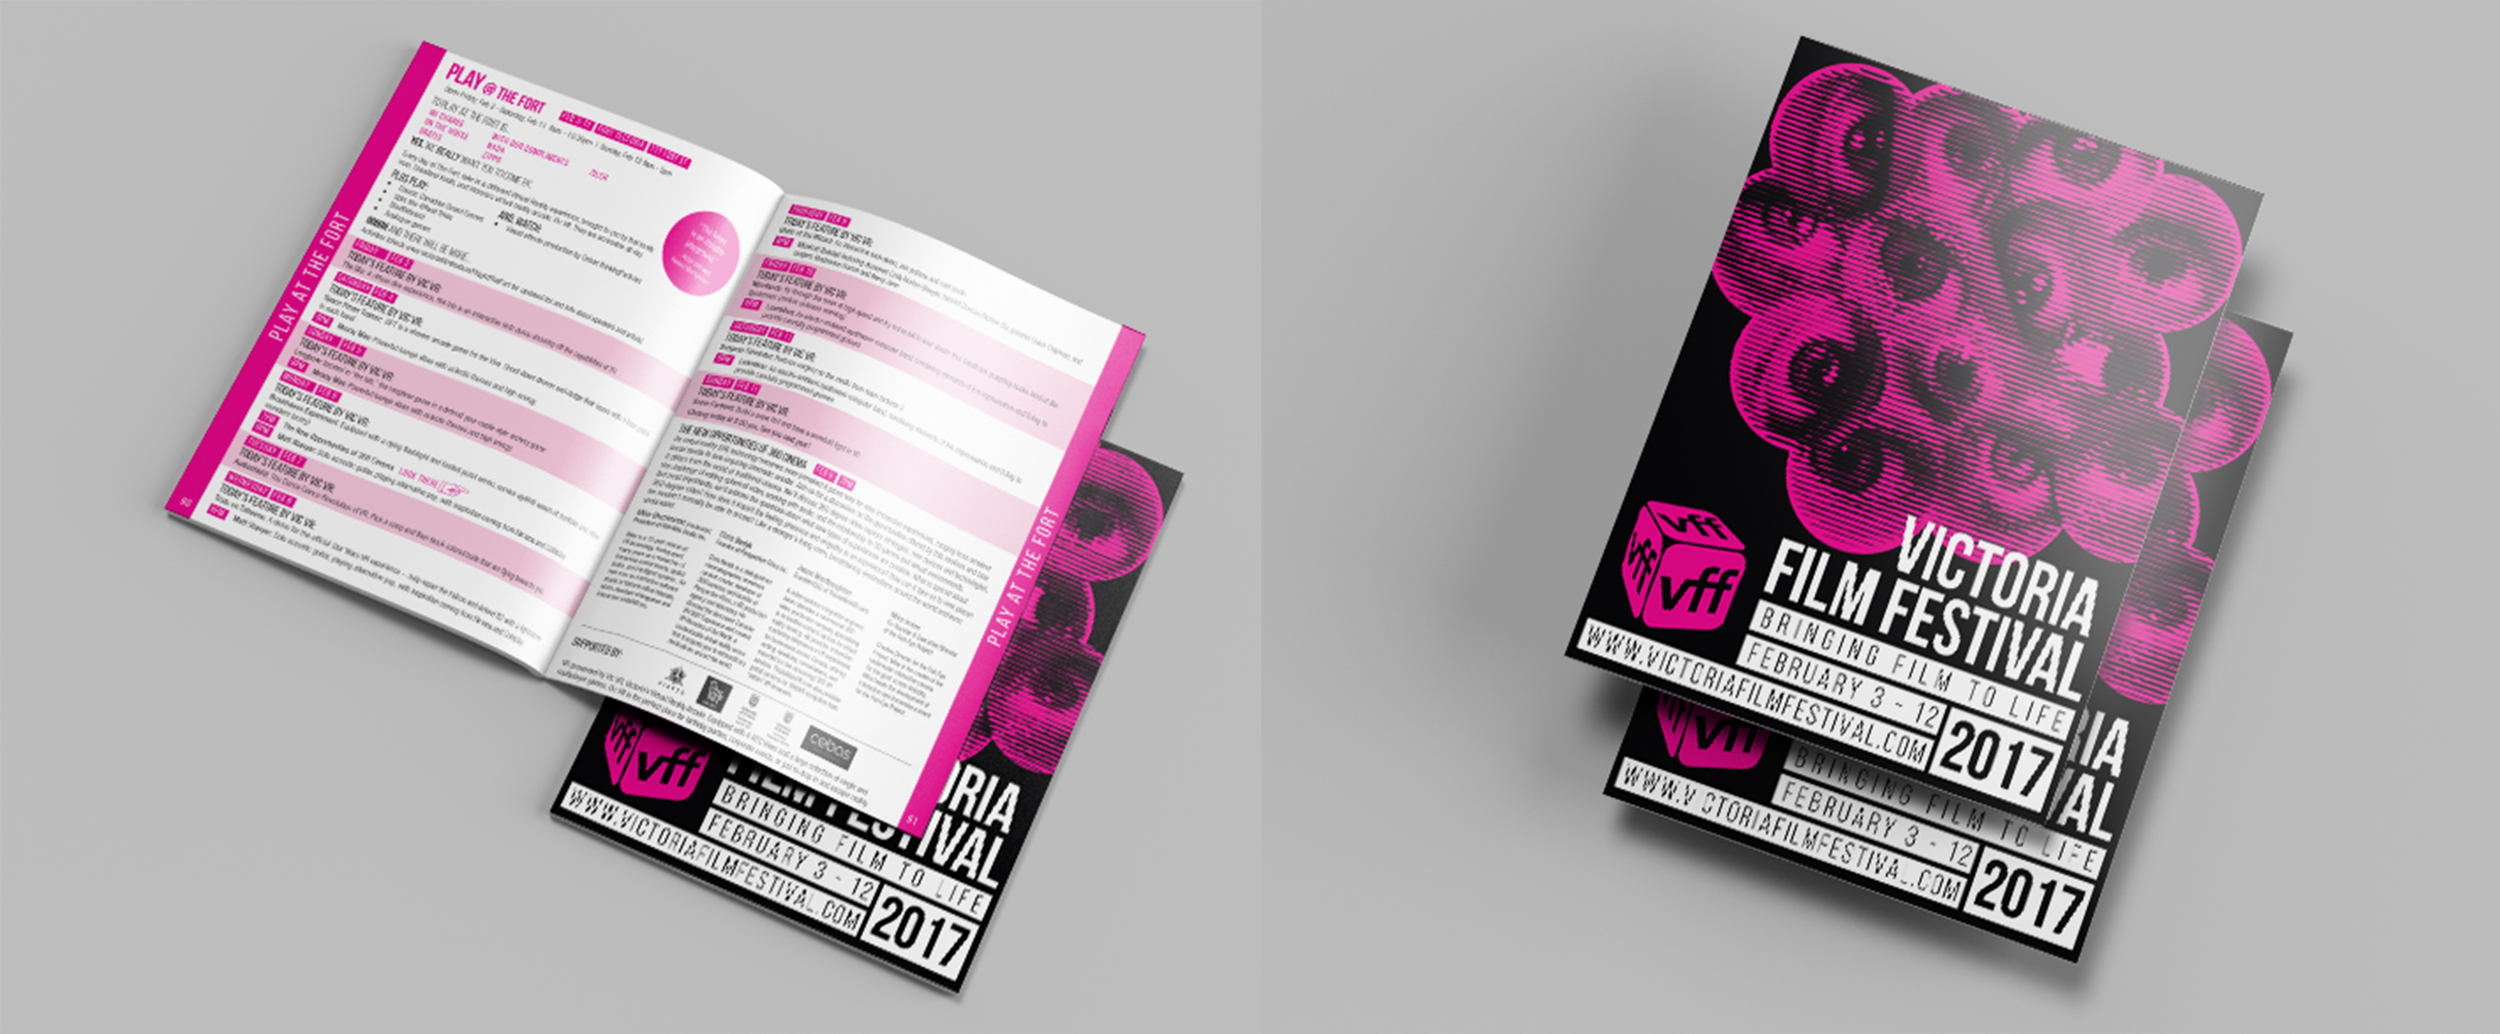  Our graphic design team also tackled the 110-page Program Guide for this year's Film Festival, complete with information on all the films being shown and a schedule of programming. 